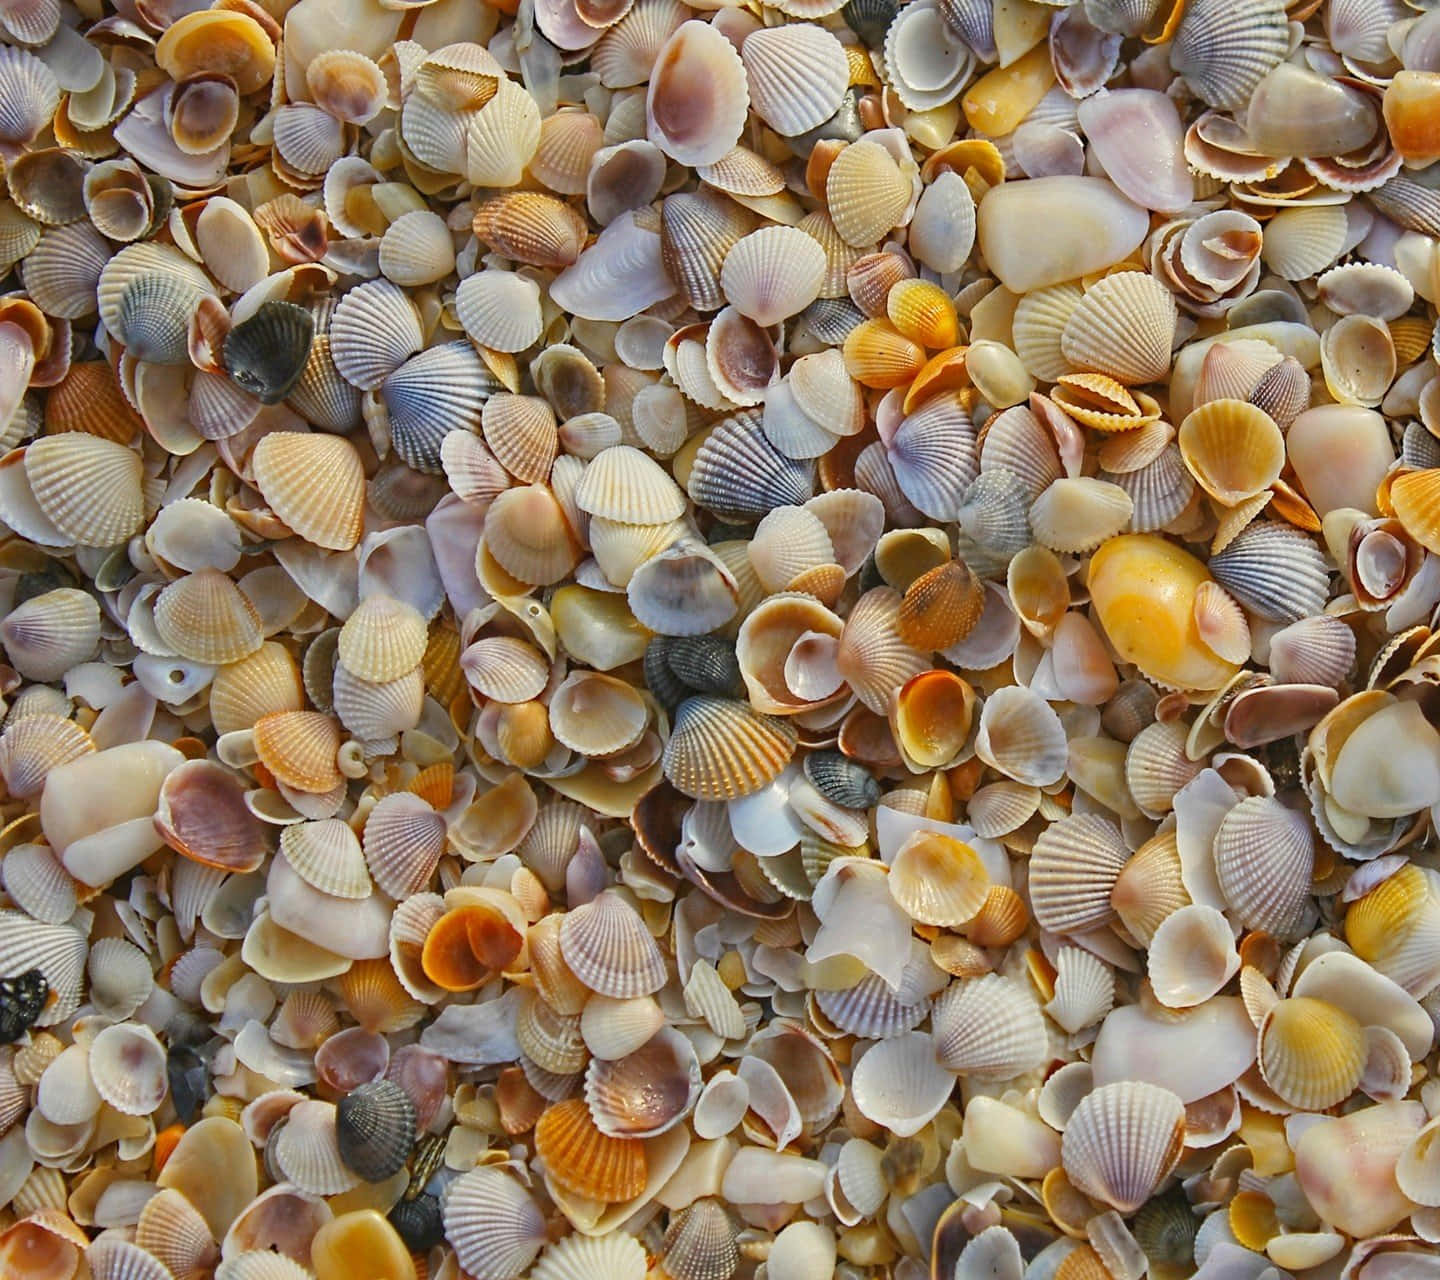 Colorful Seashell Collection on a Sandy Beach Background